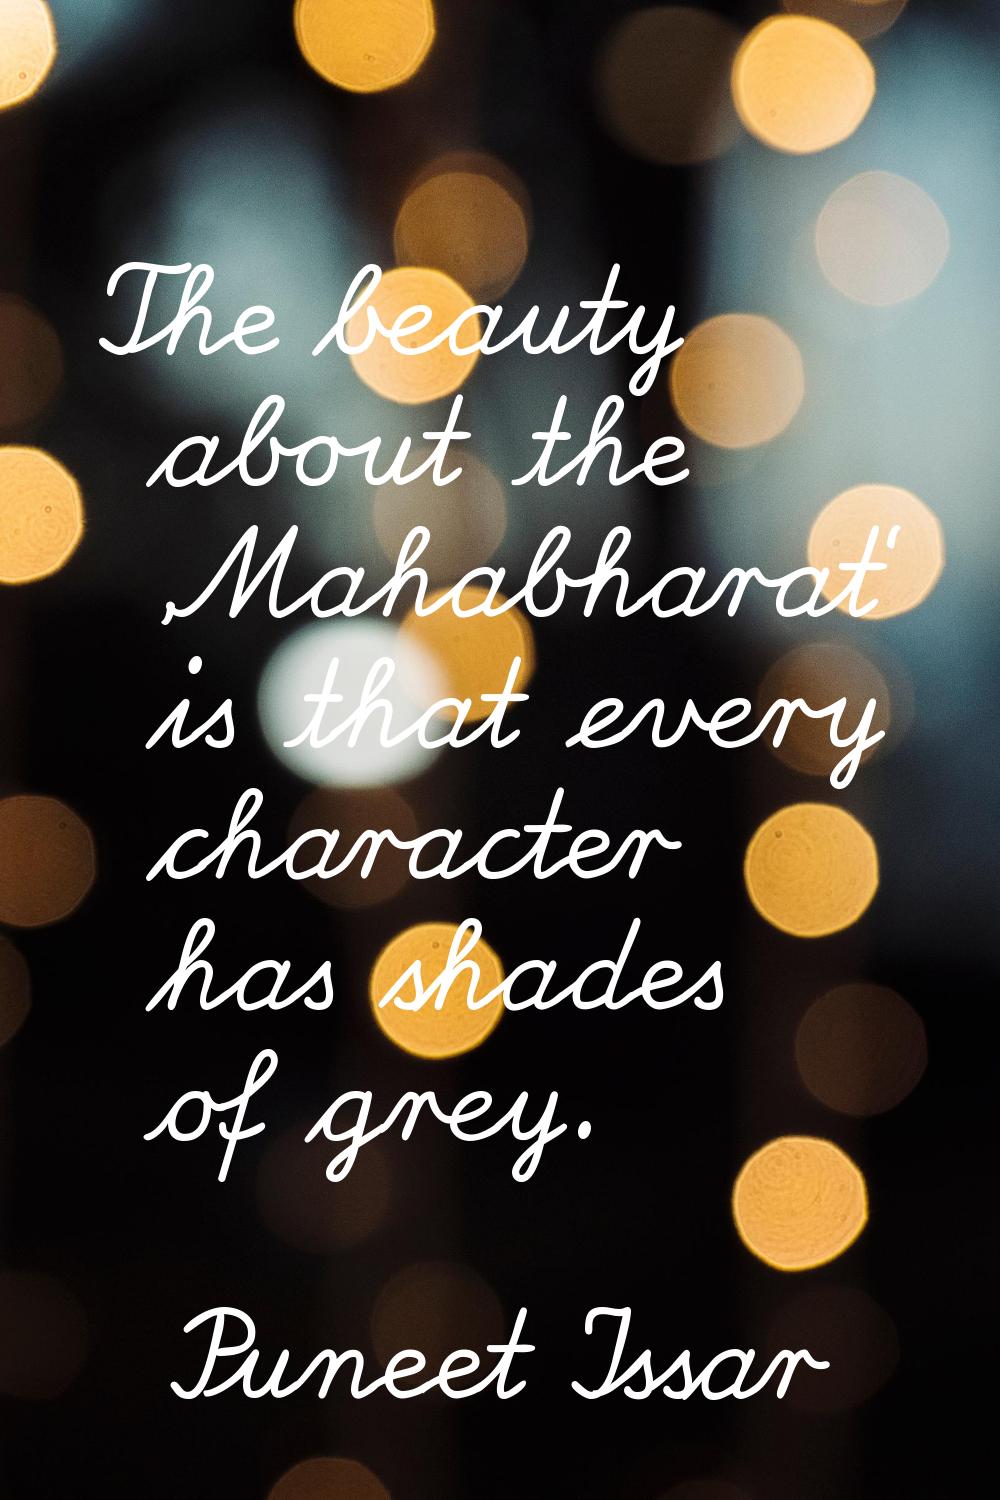 The beauty about the 'Mahabharat' is that every character has shades of grey.